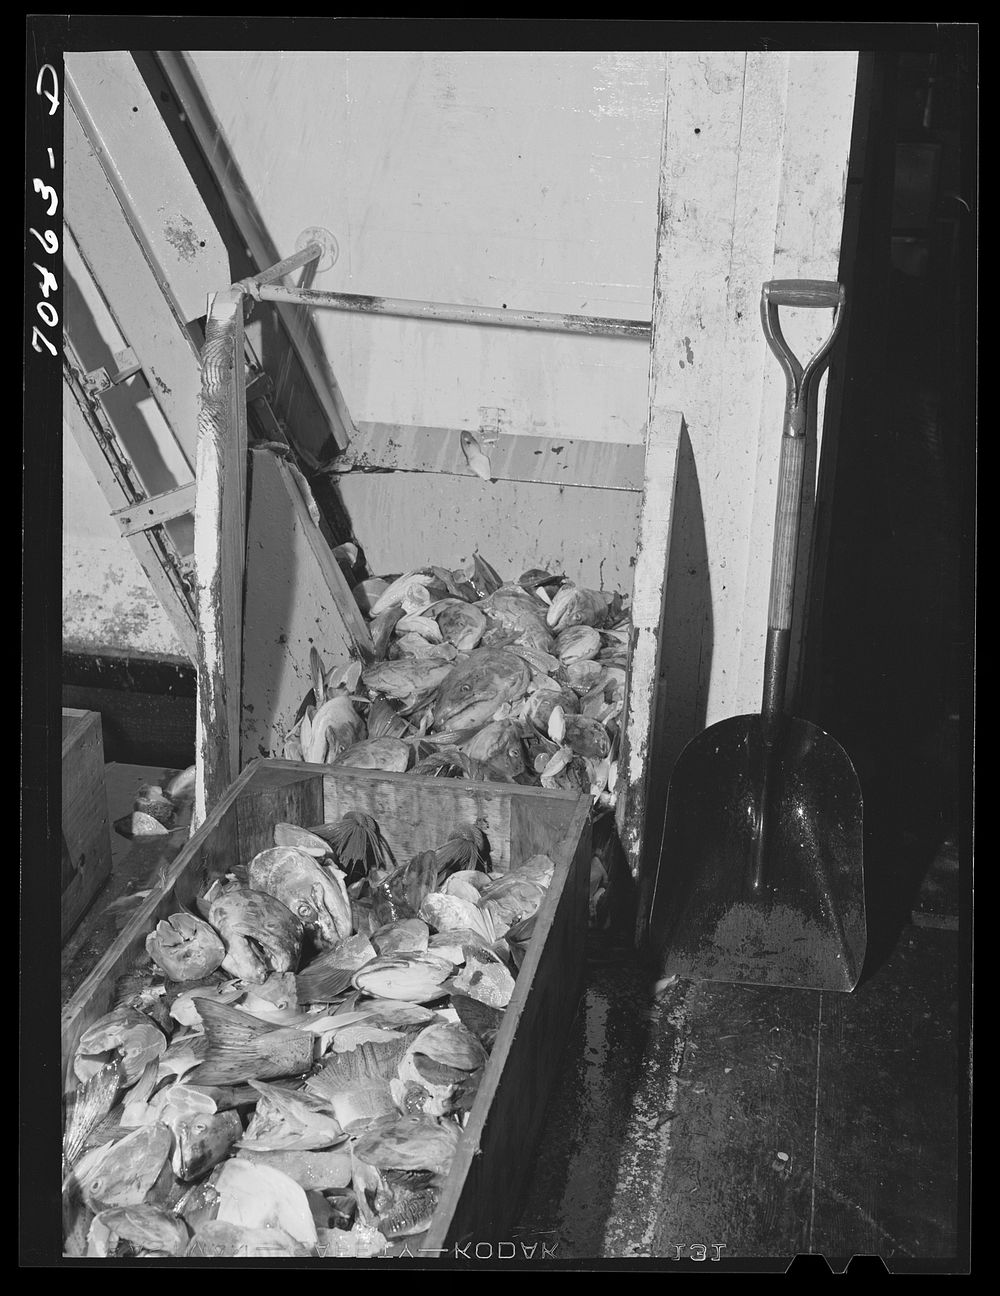 Heads and tails of salmon which will be boiled to reclaim the valuable oils. Columbia River Packing Association, Astoria…